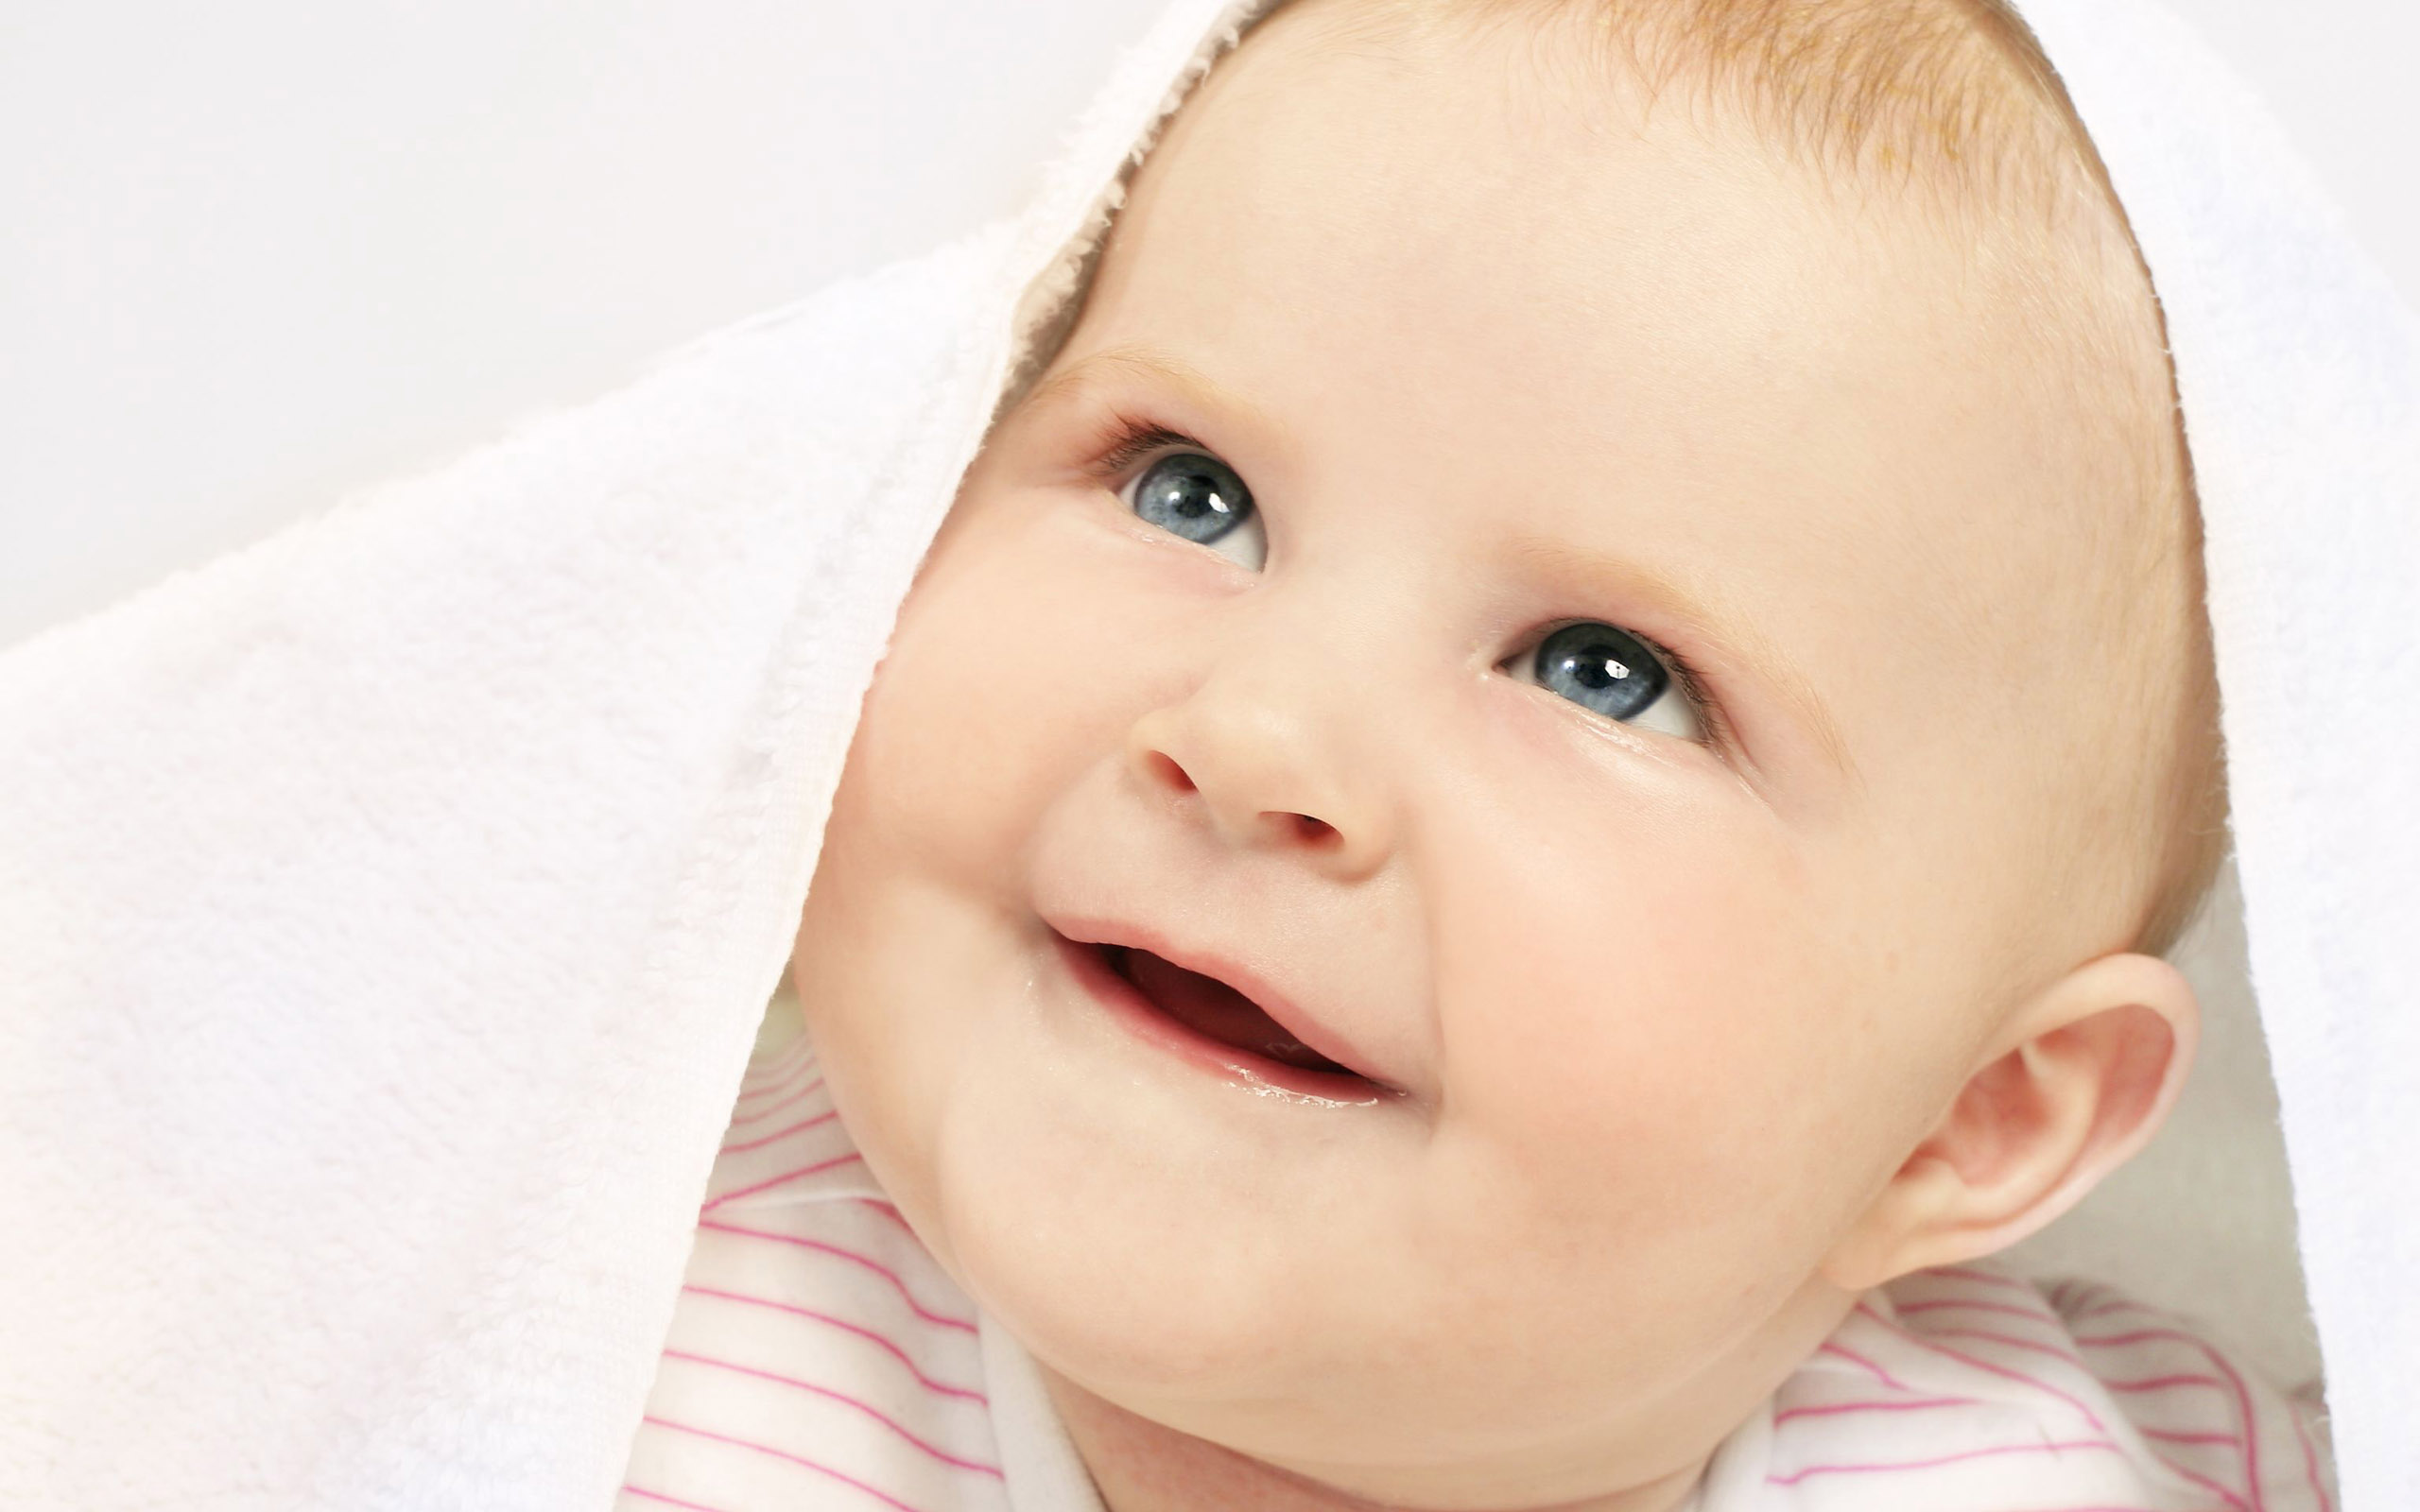 About Cute Baby 3d Live Wallpaper Google Play version   Apptopia